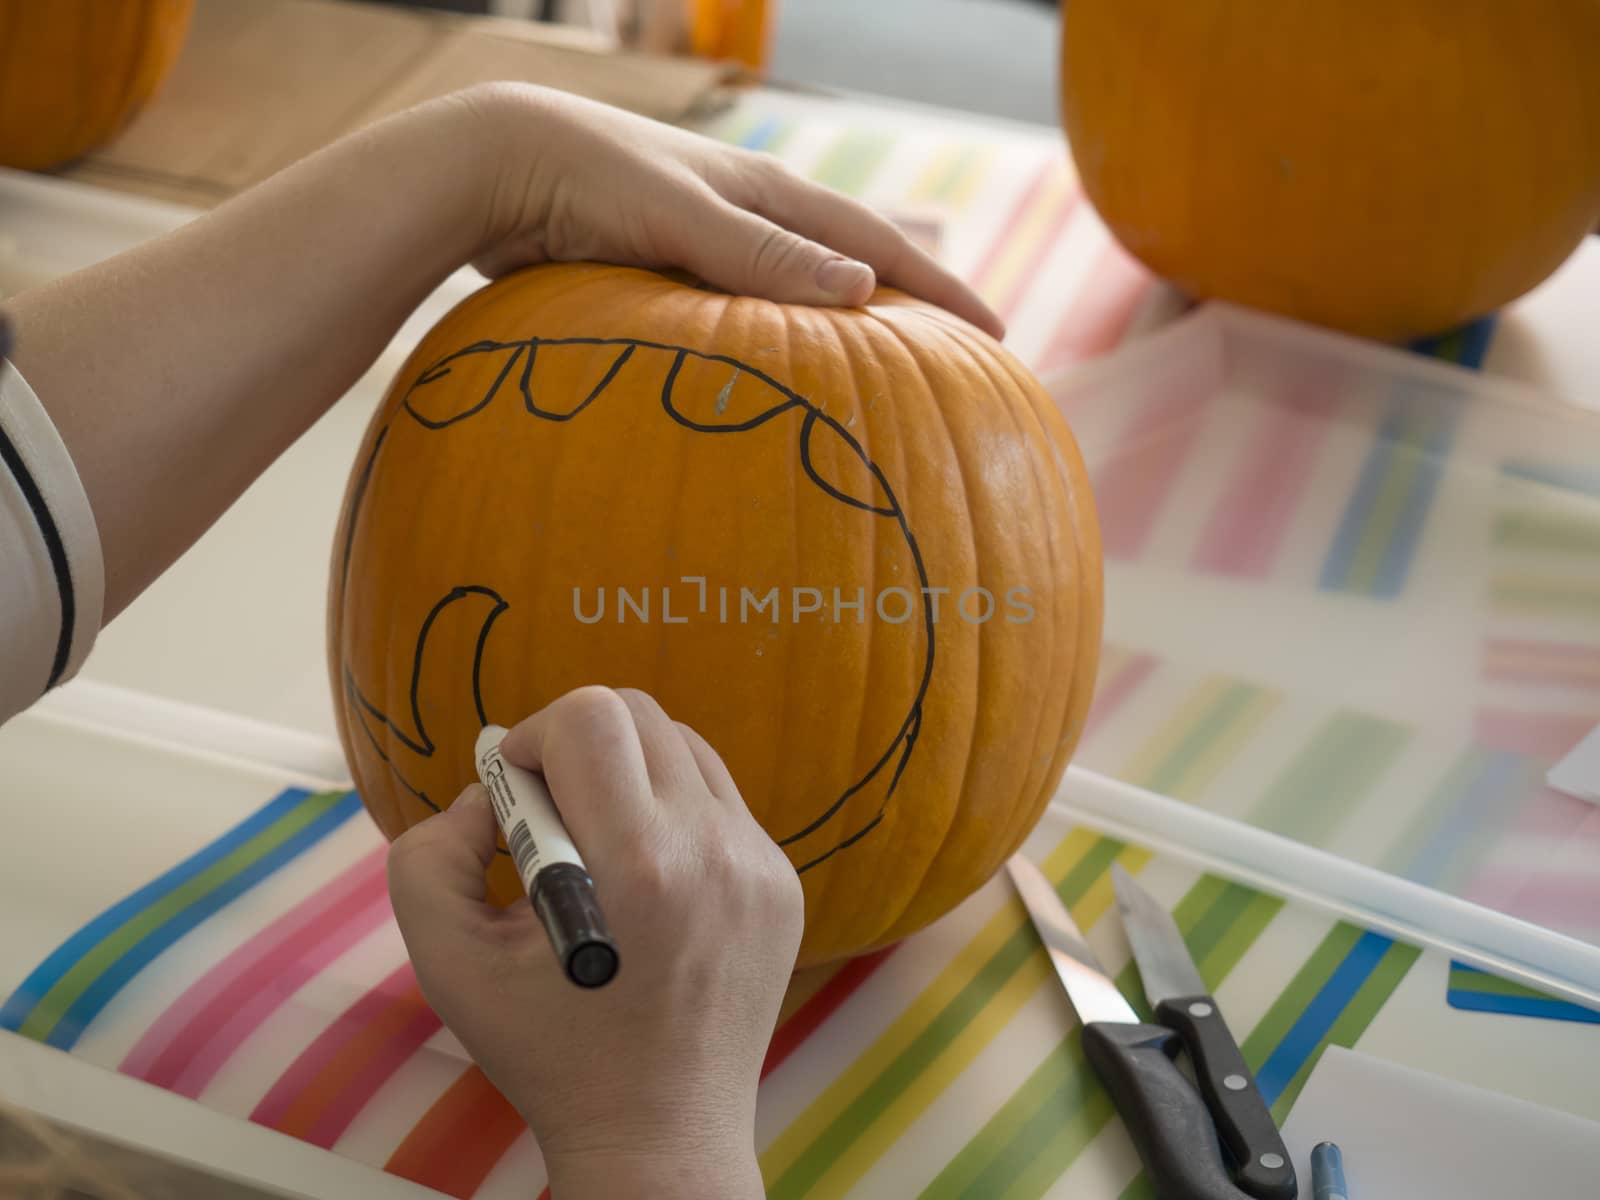 Process of carving pumpkin to make Jack-o-lantern. Creating traditional decoration for Halloween and Thanksgiving. Woman drawing decor on big orange pumpkin by Henkeova